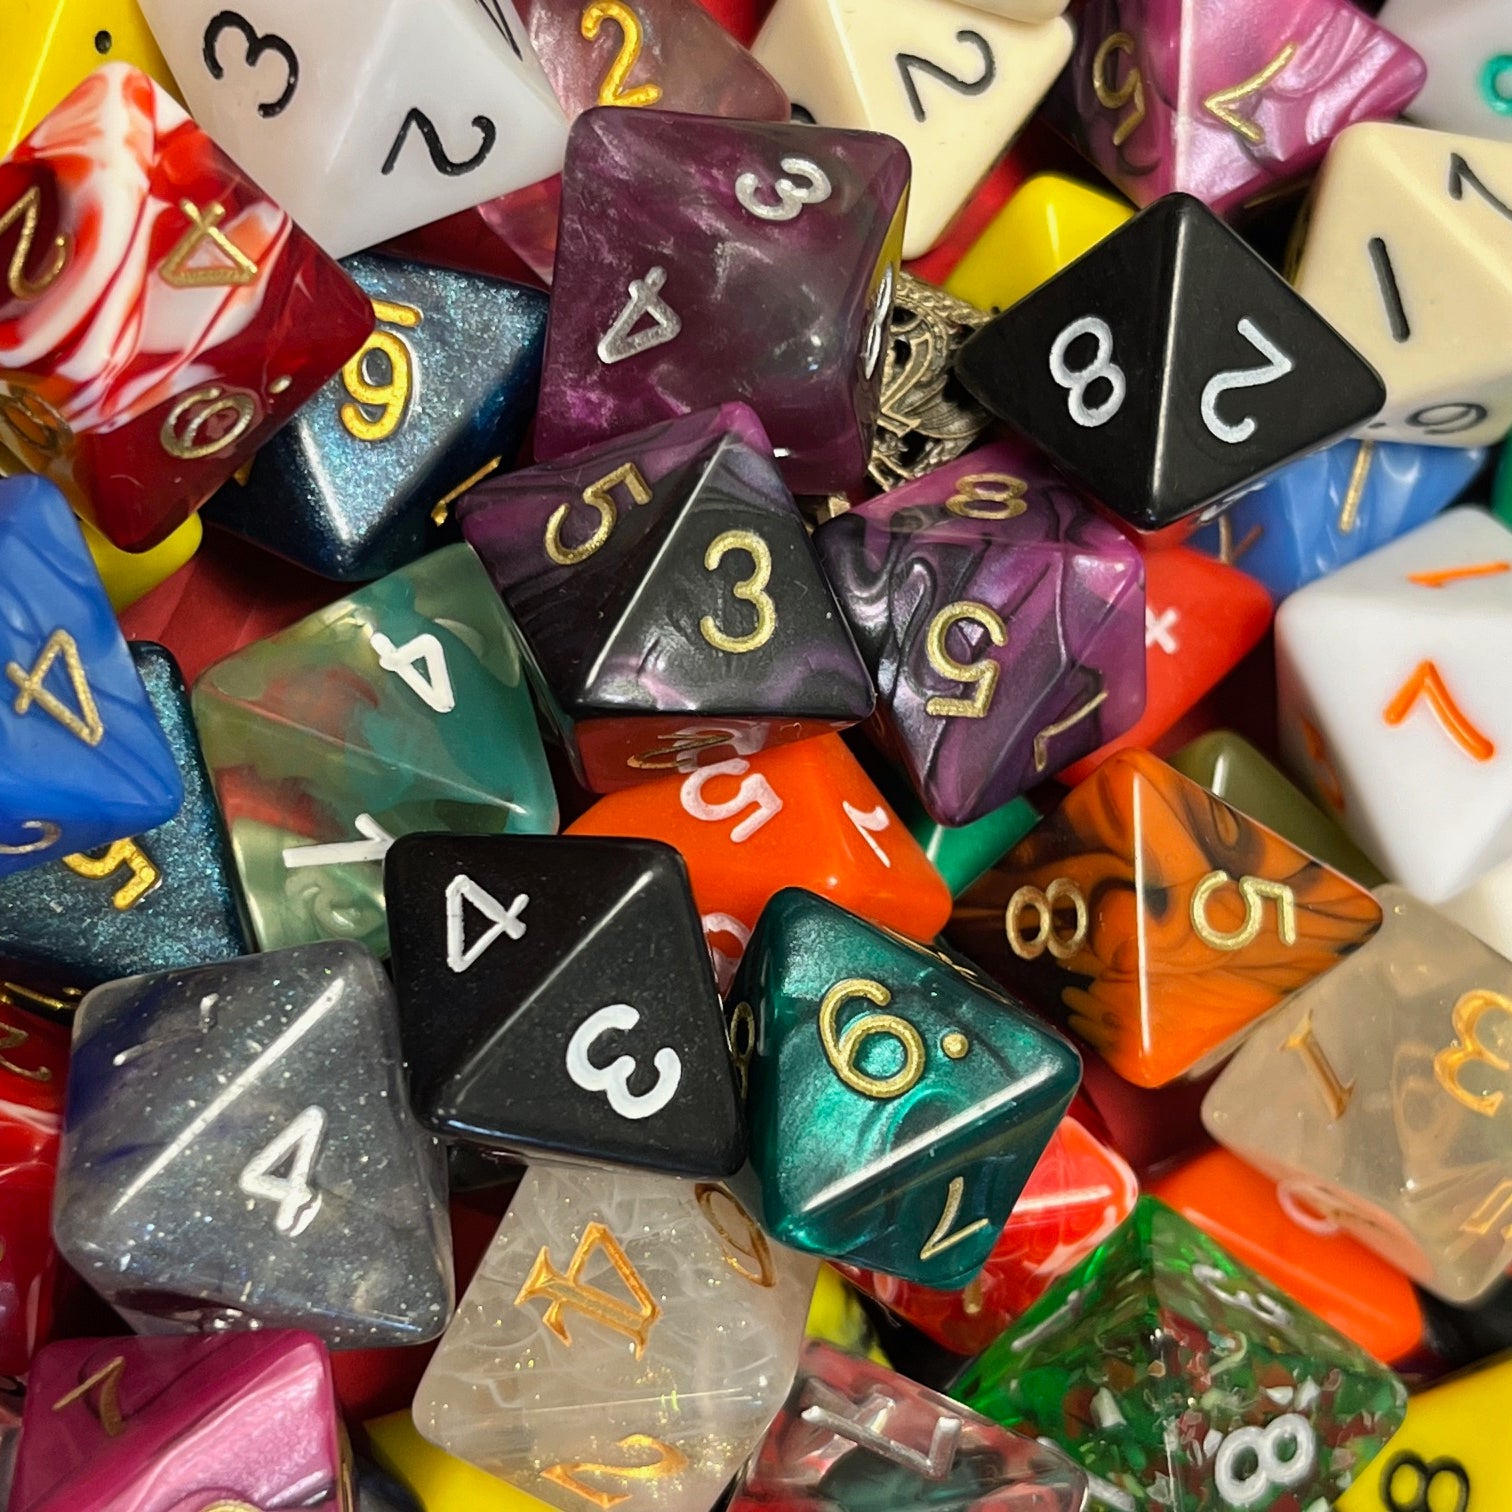 Random D8 TTRPG dice sets for DND and role playing games and dice goblin collectors